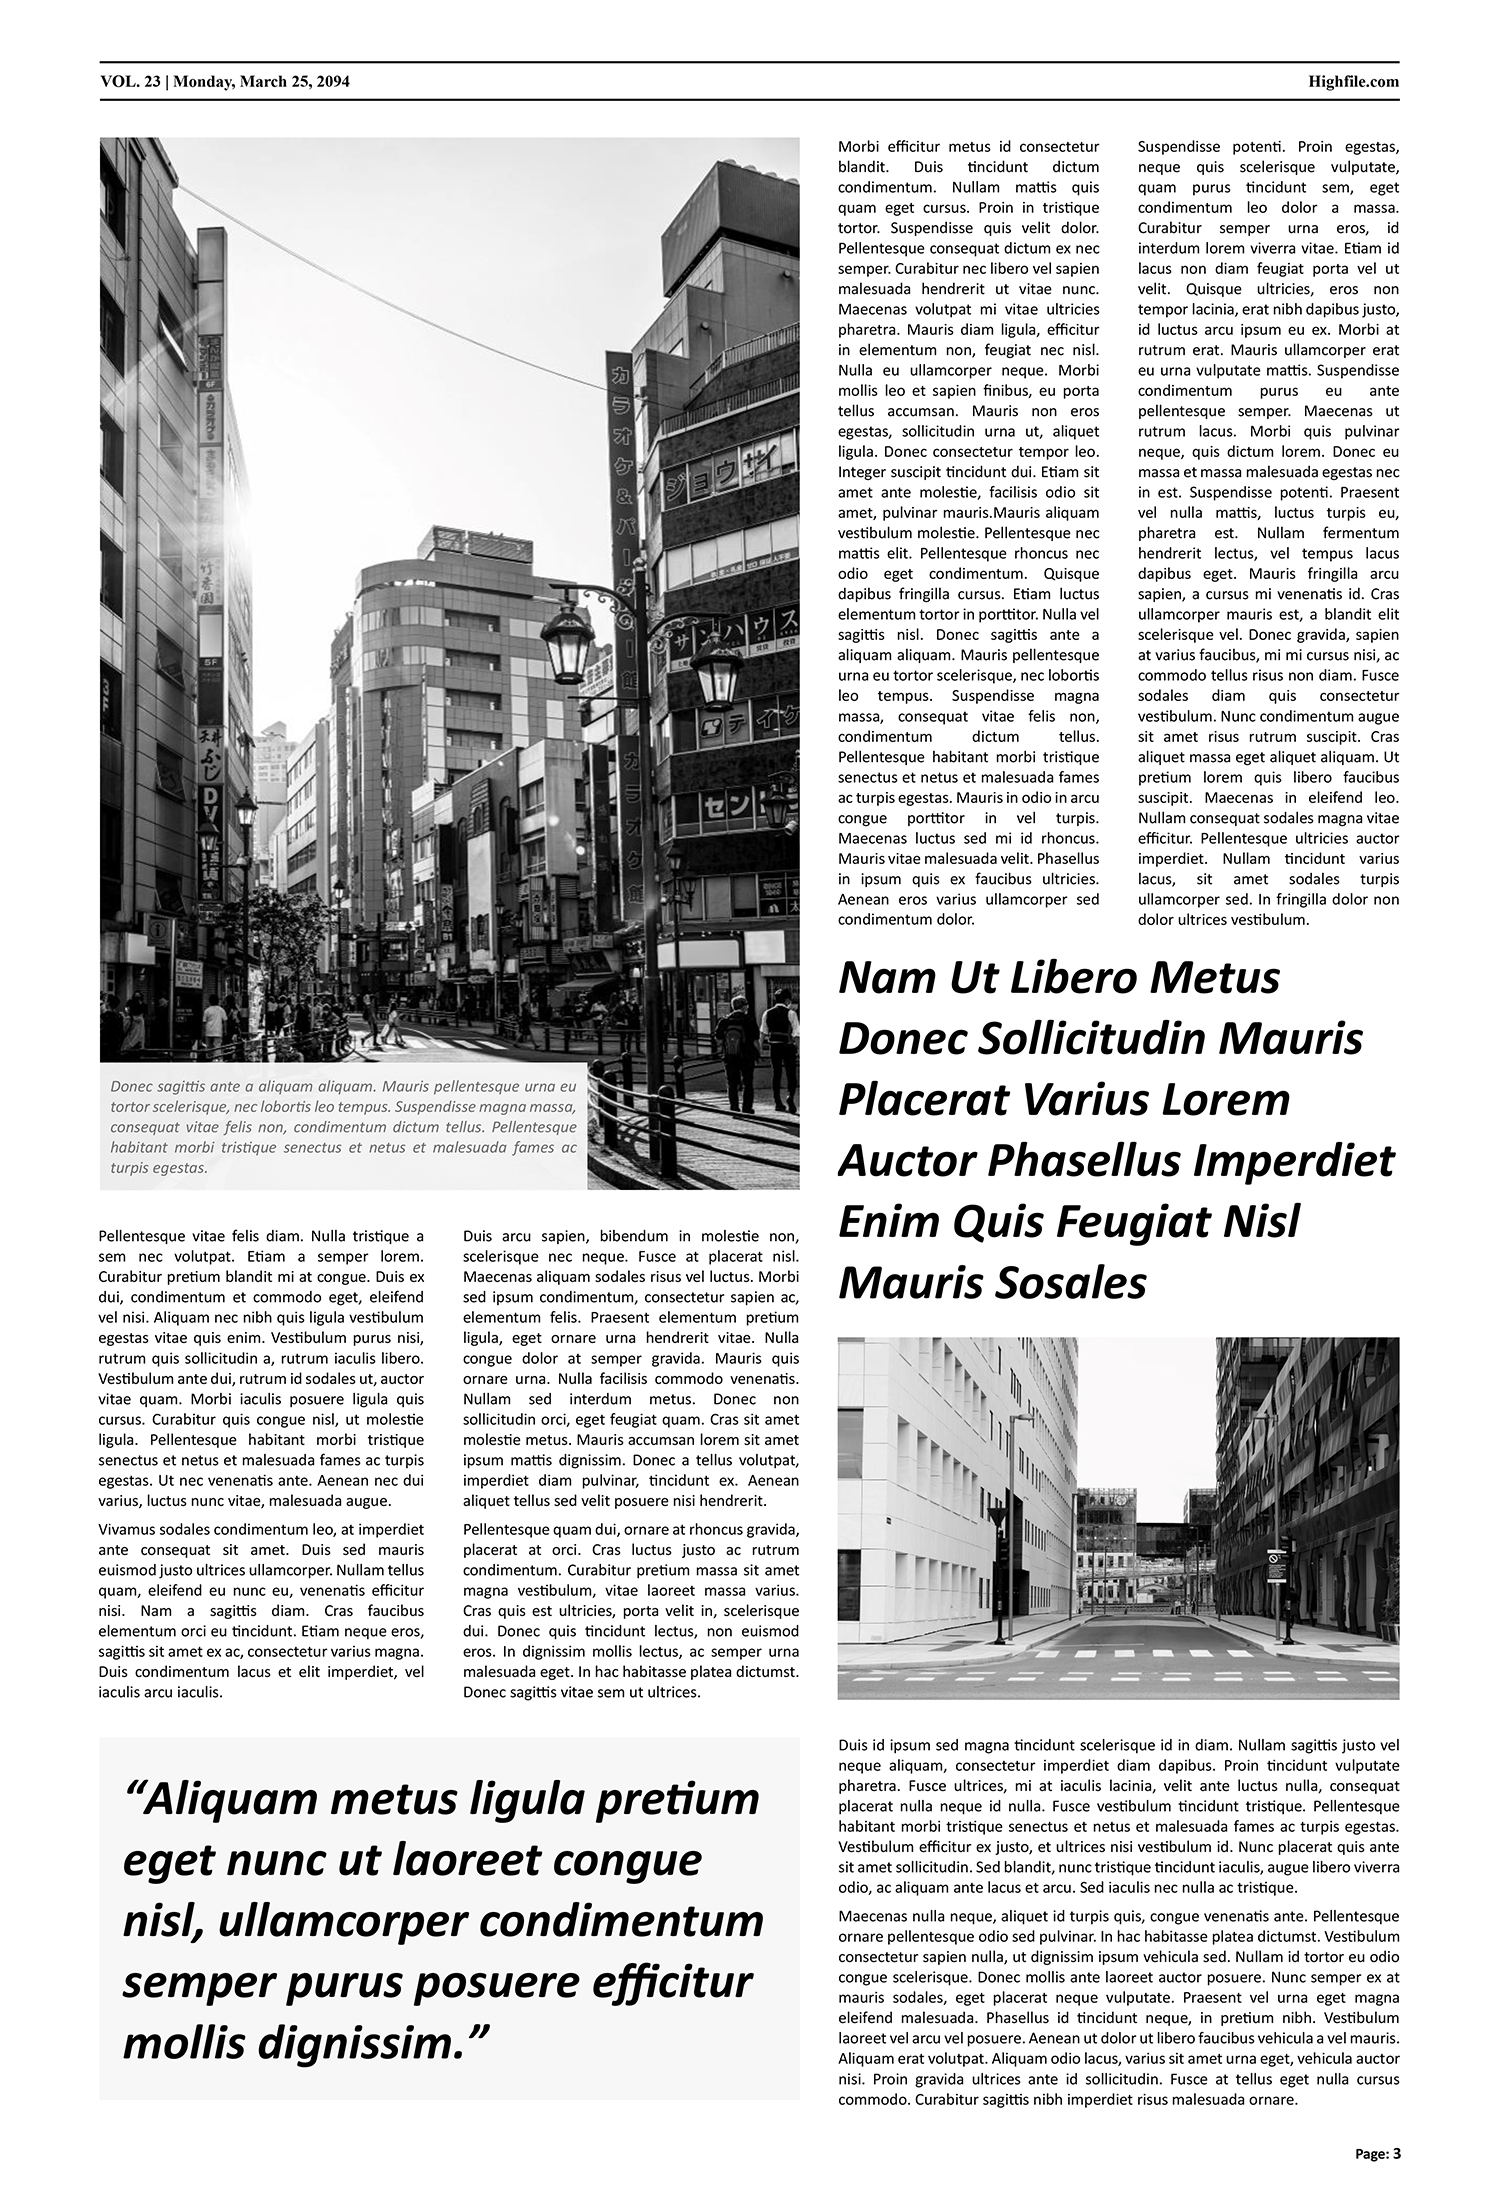 Blank Newspaper Template - Page 03